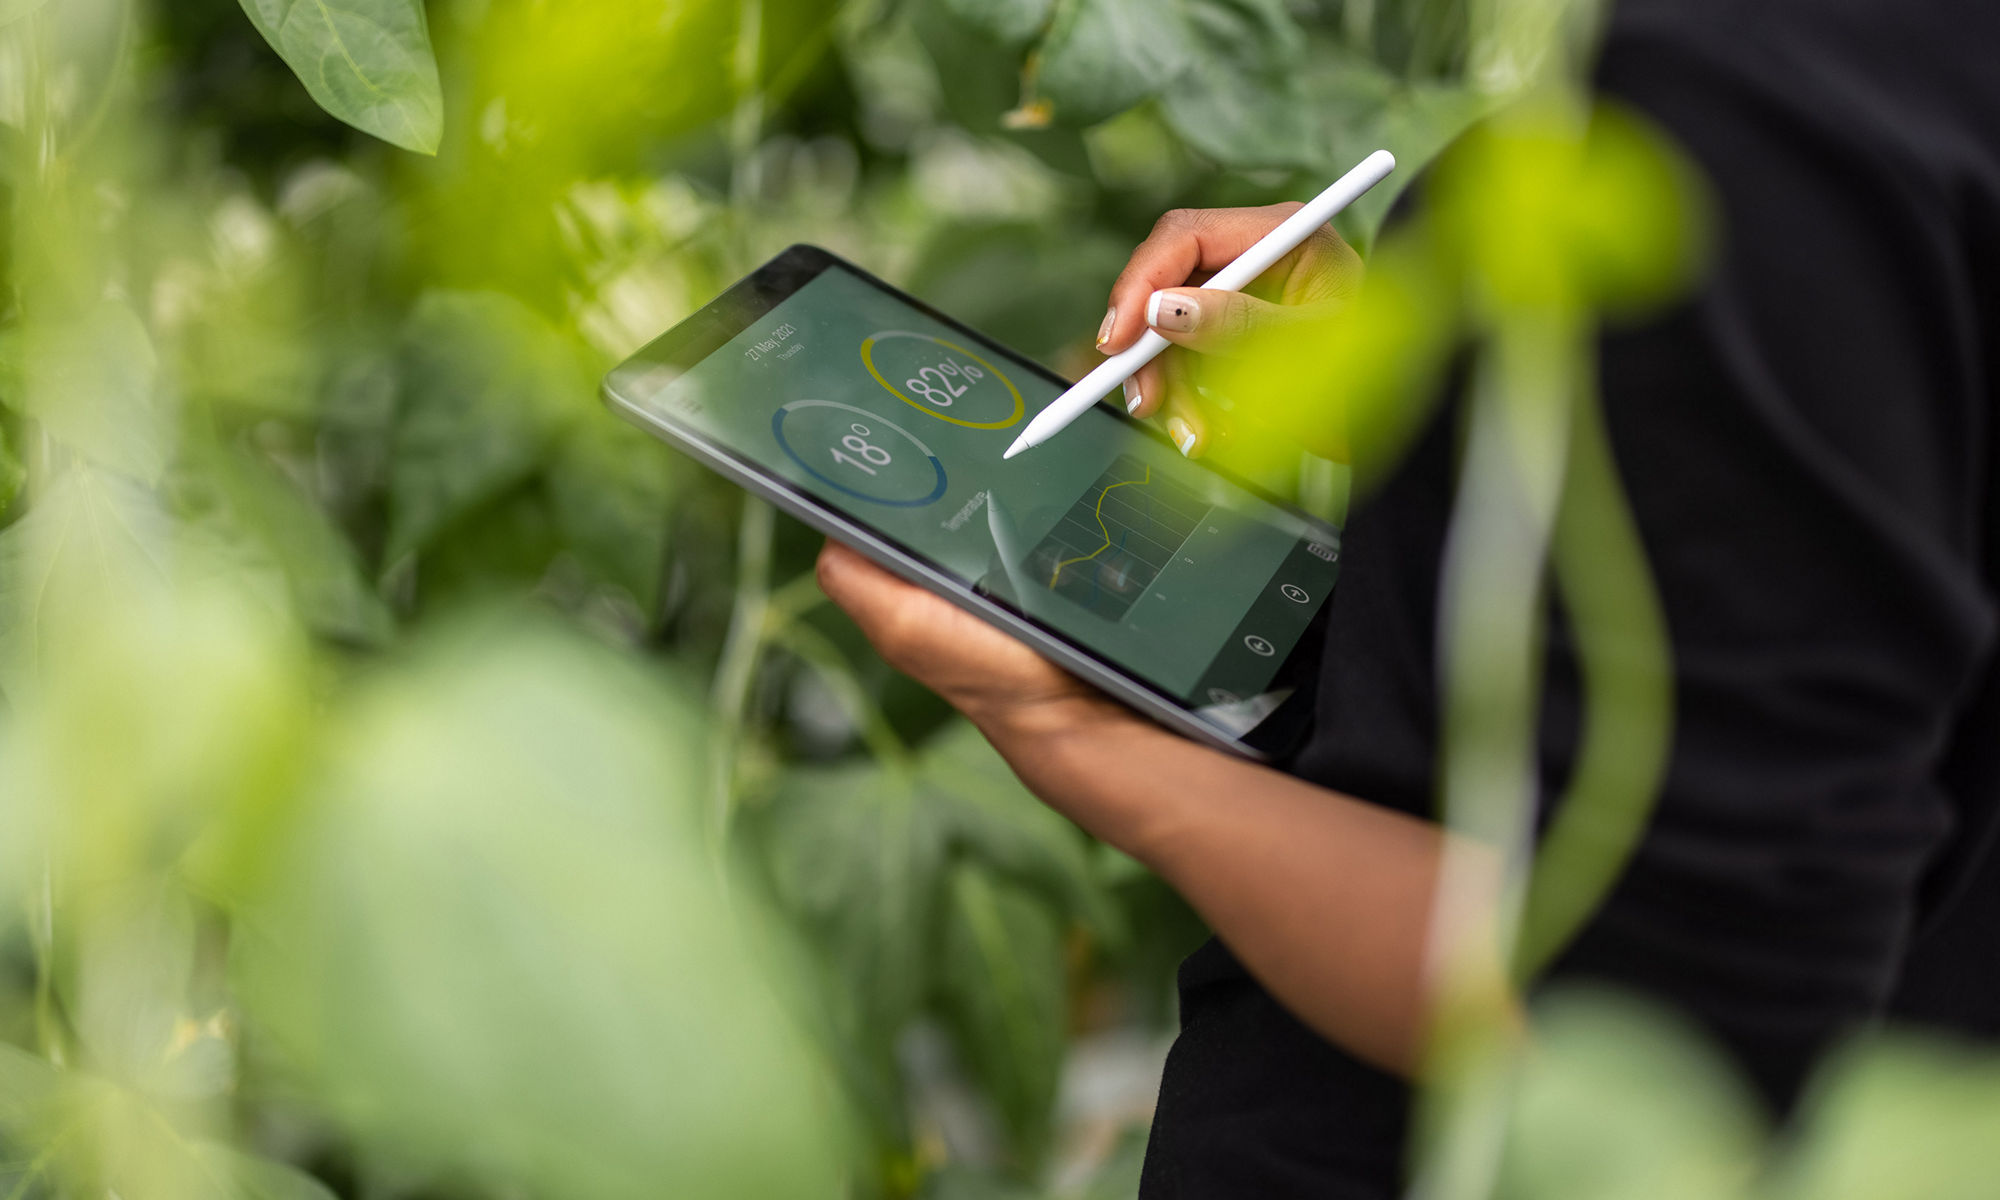 person operating ipad among leaves